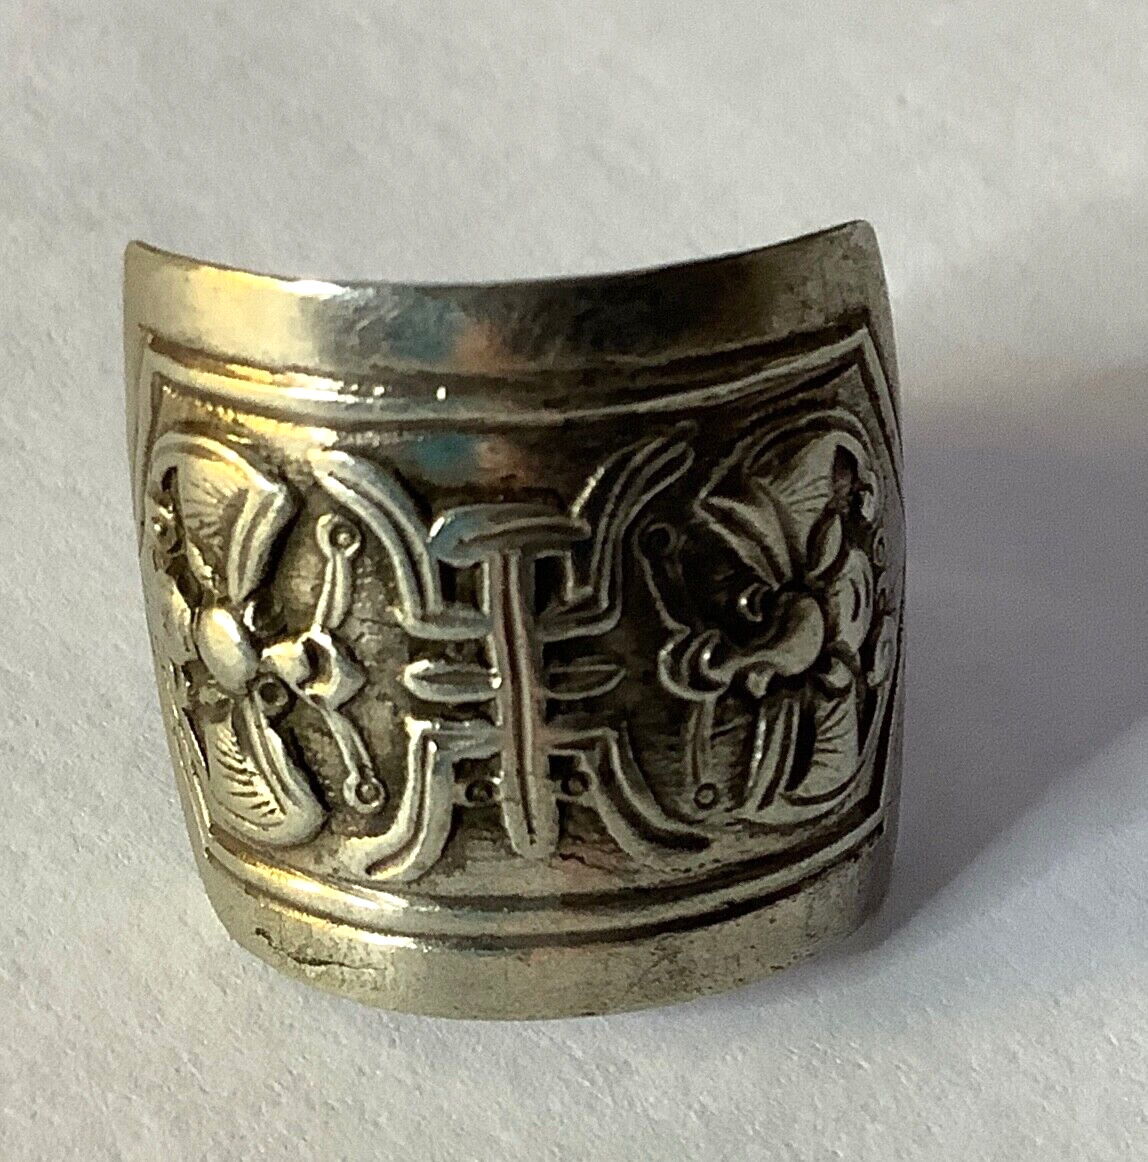 ANTIQUE QING Sterling SILVER BATS LONGEVITY  SHOU SIGN Chinese RING  Adjustable